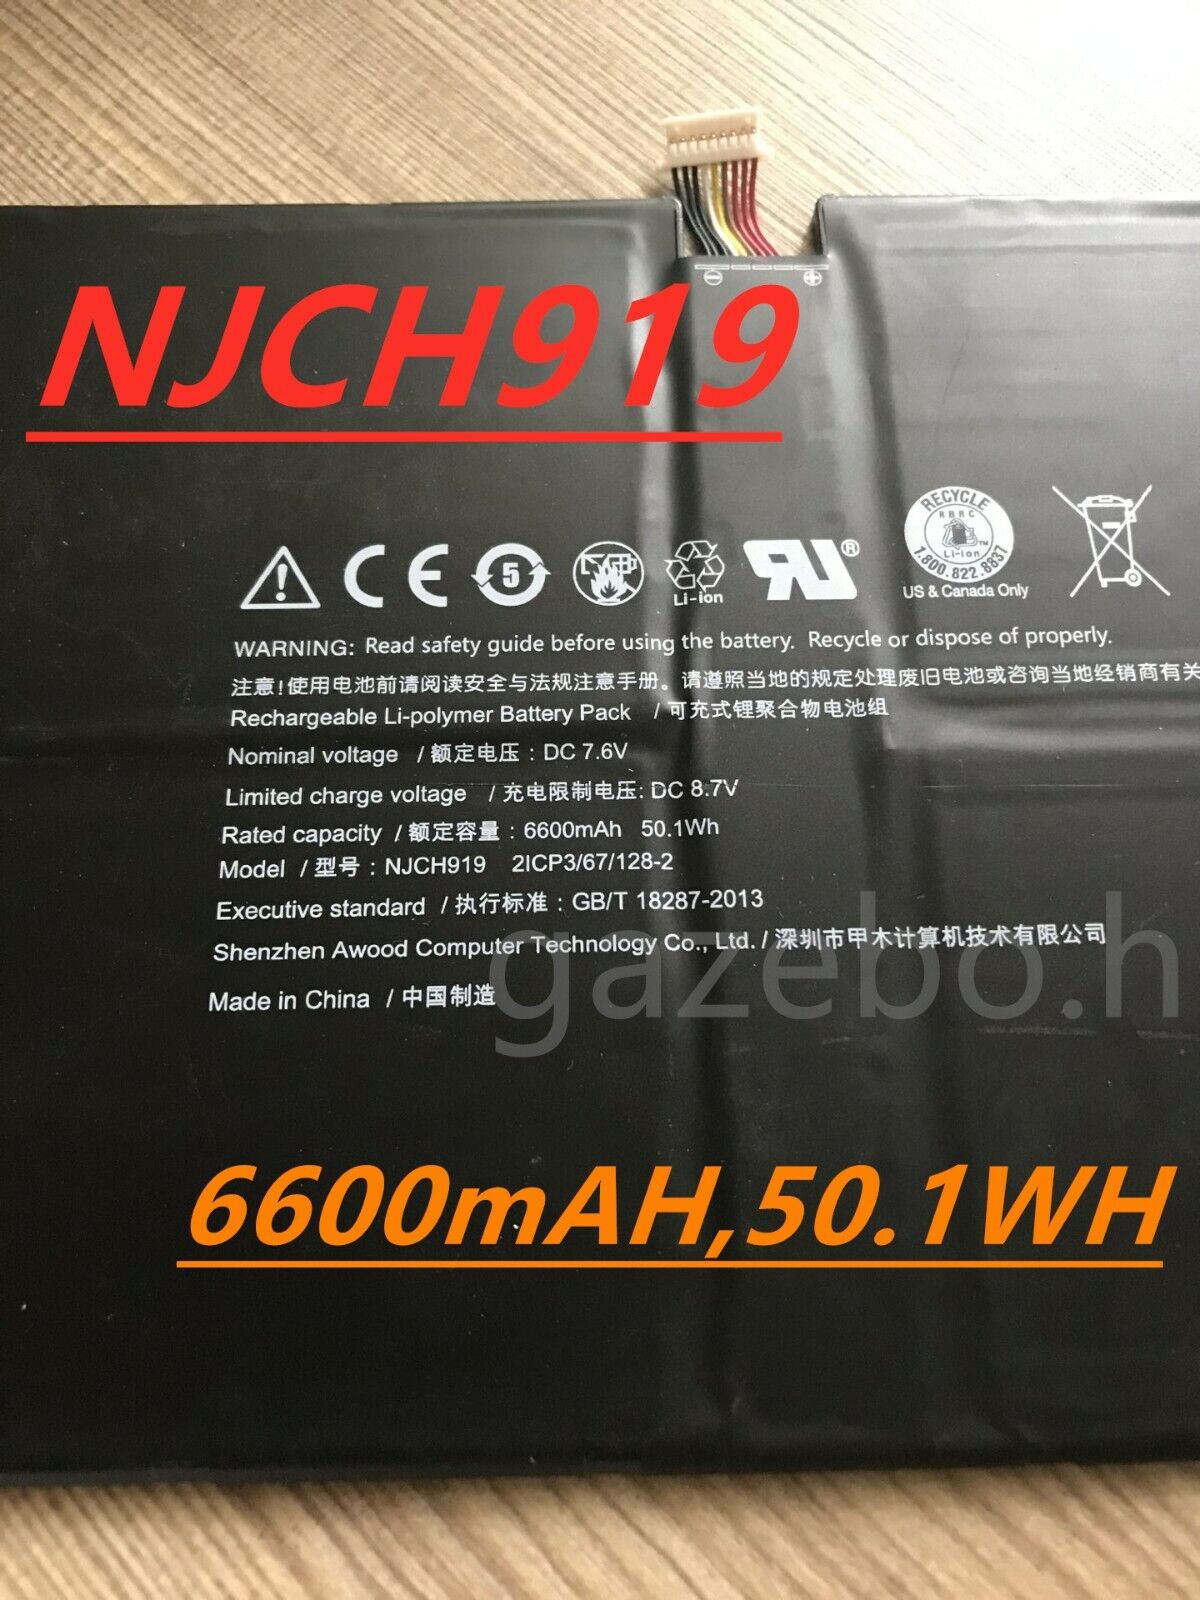 NEW Original 6600mAH 50.1WH 7.6V For NJCH919 Rechargeable Li-polymer Battery 